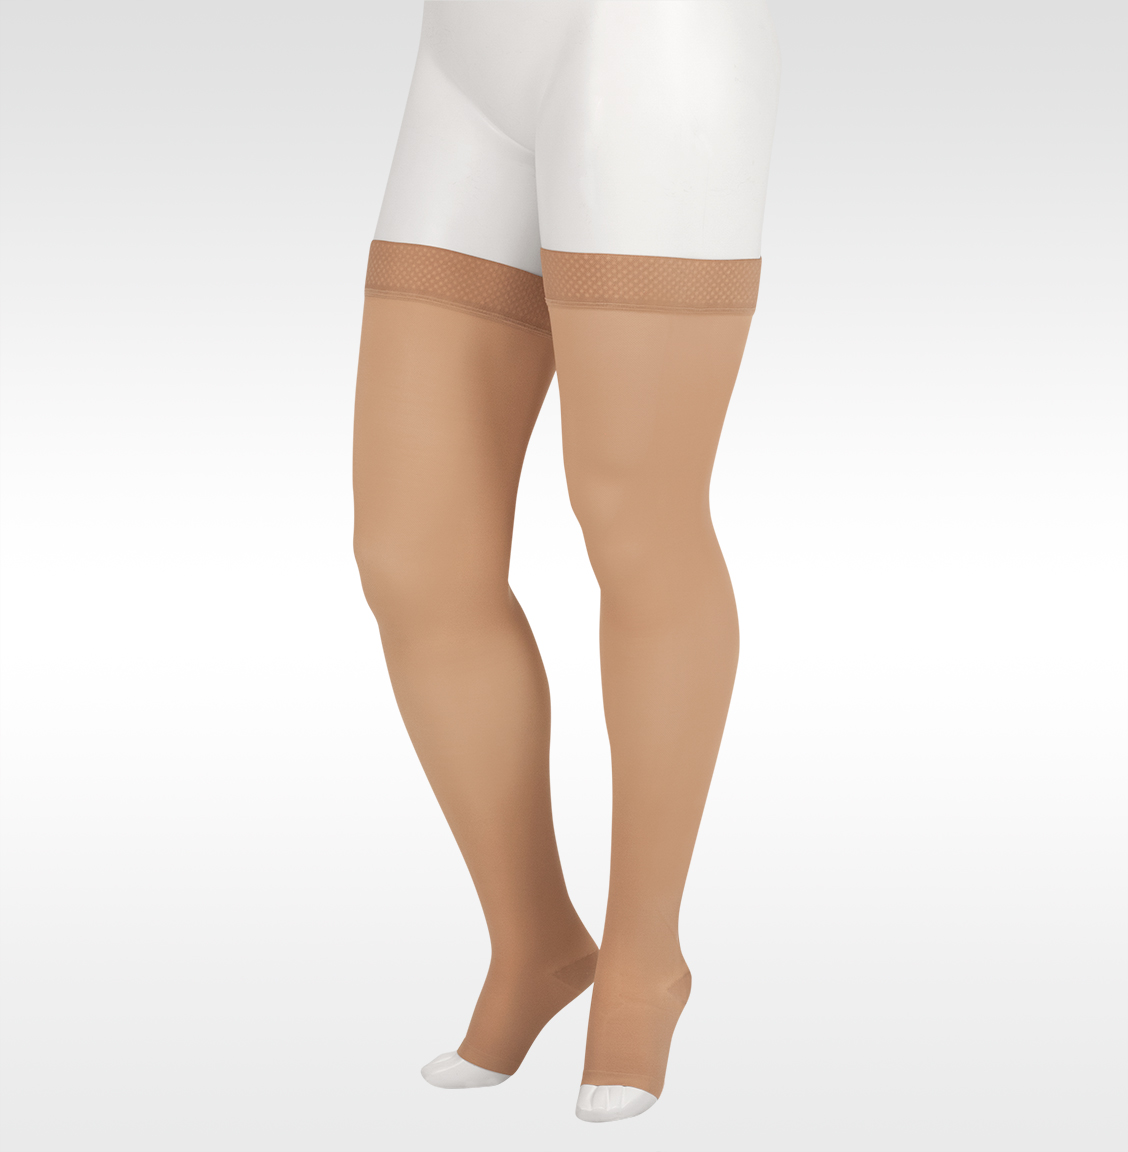 Compression Stockings, Thigh High